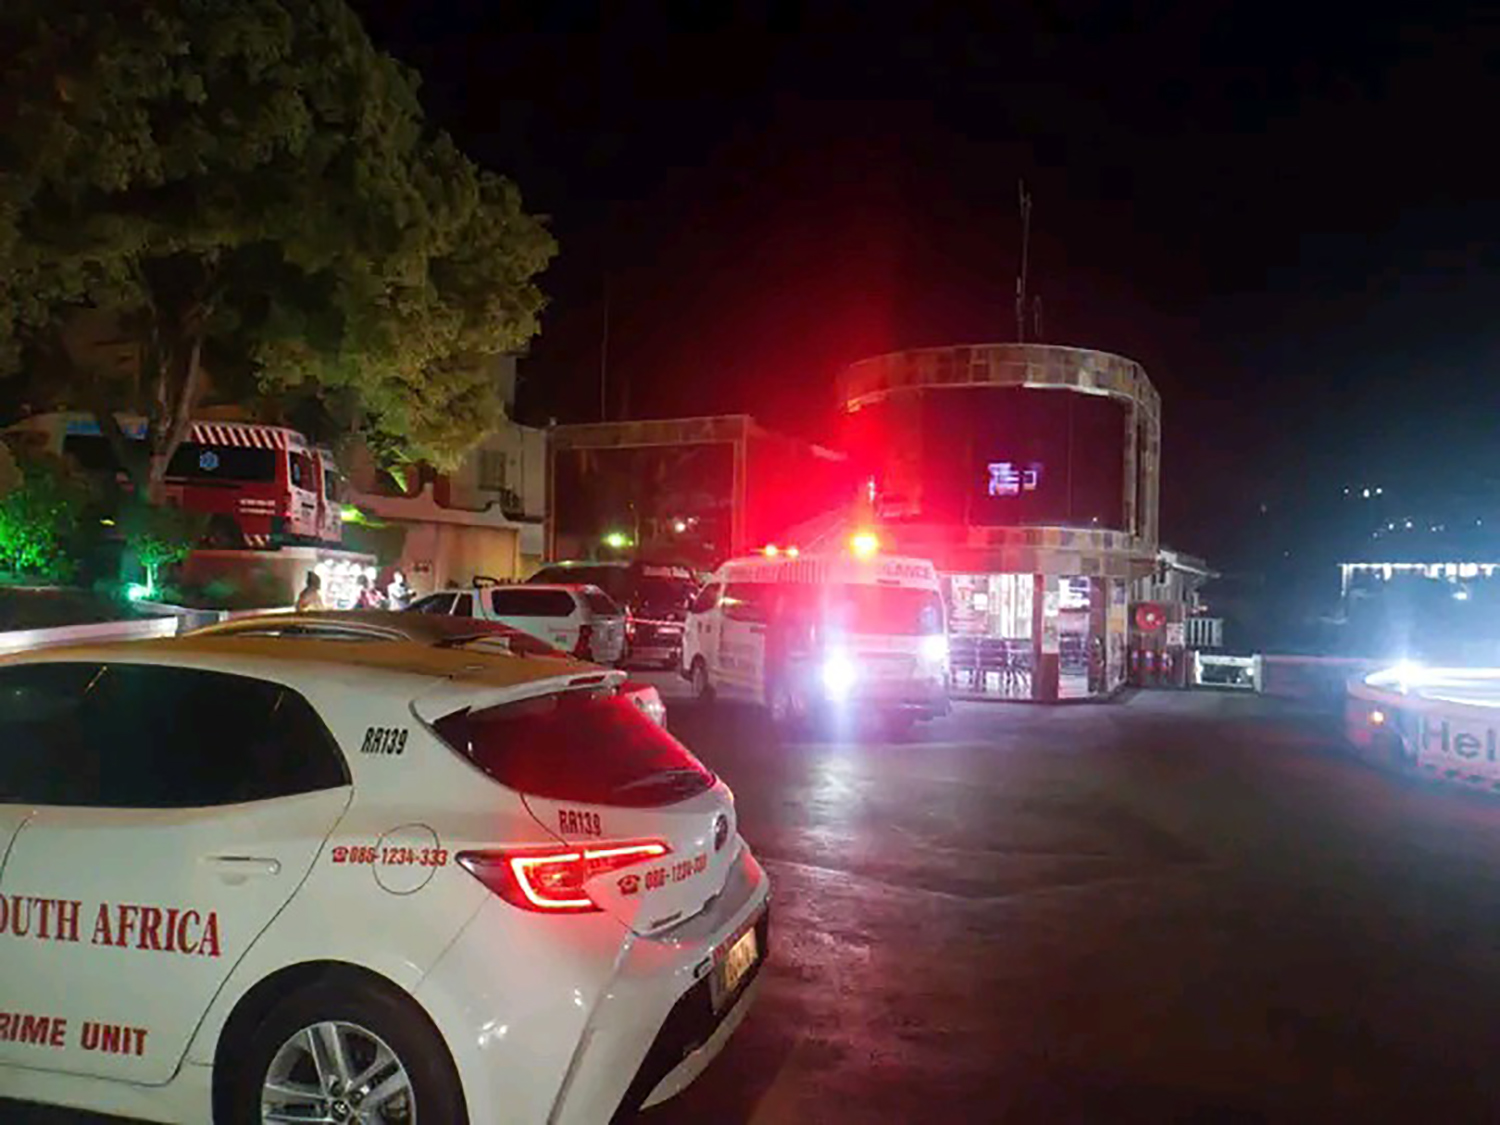 Sad news: 1 taxi driver killed during the robbery 1